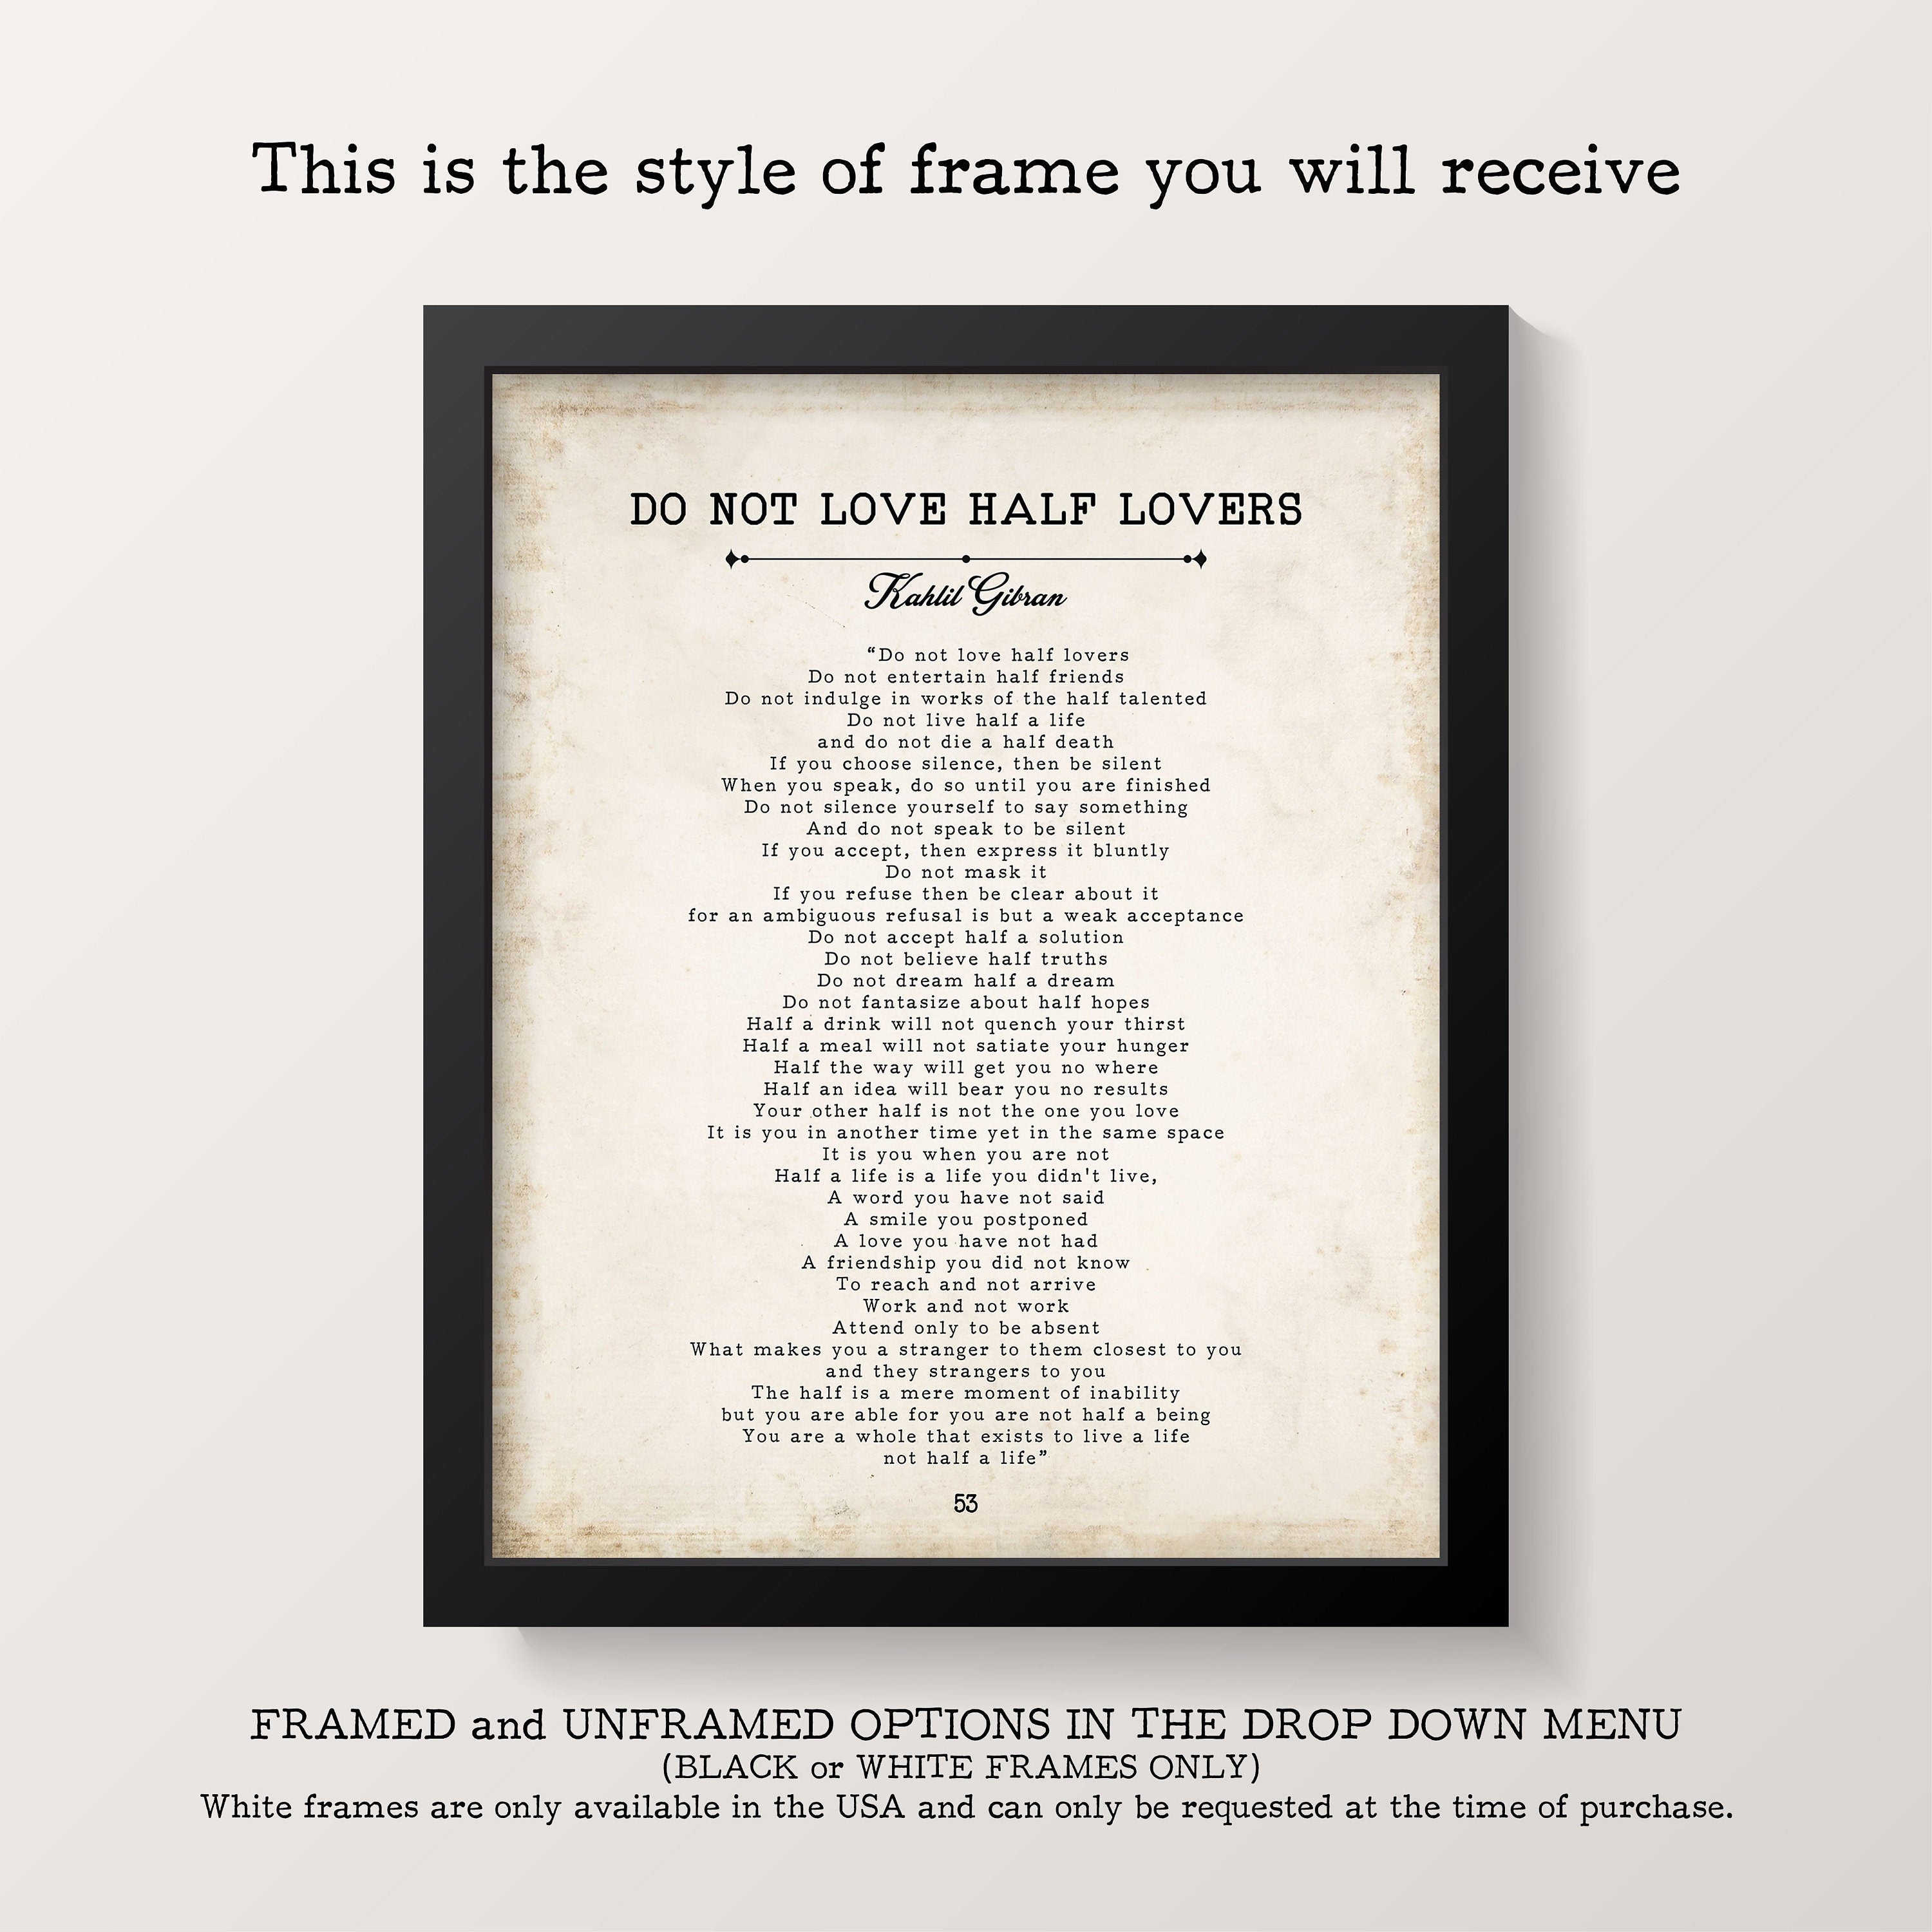 Edna St. Vincent Millay Poem Print - When I Too Long Have Looked Upon Your Face Poetry Print in a Vintage Style Unframed and Framed Art